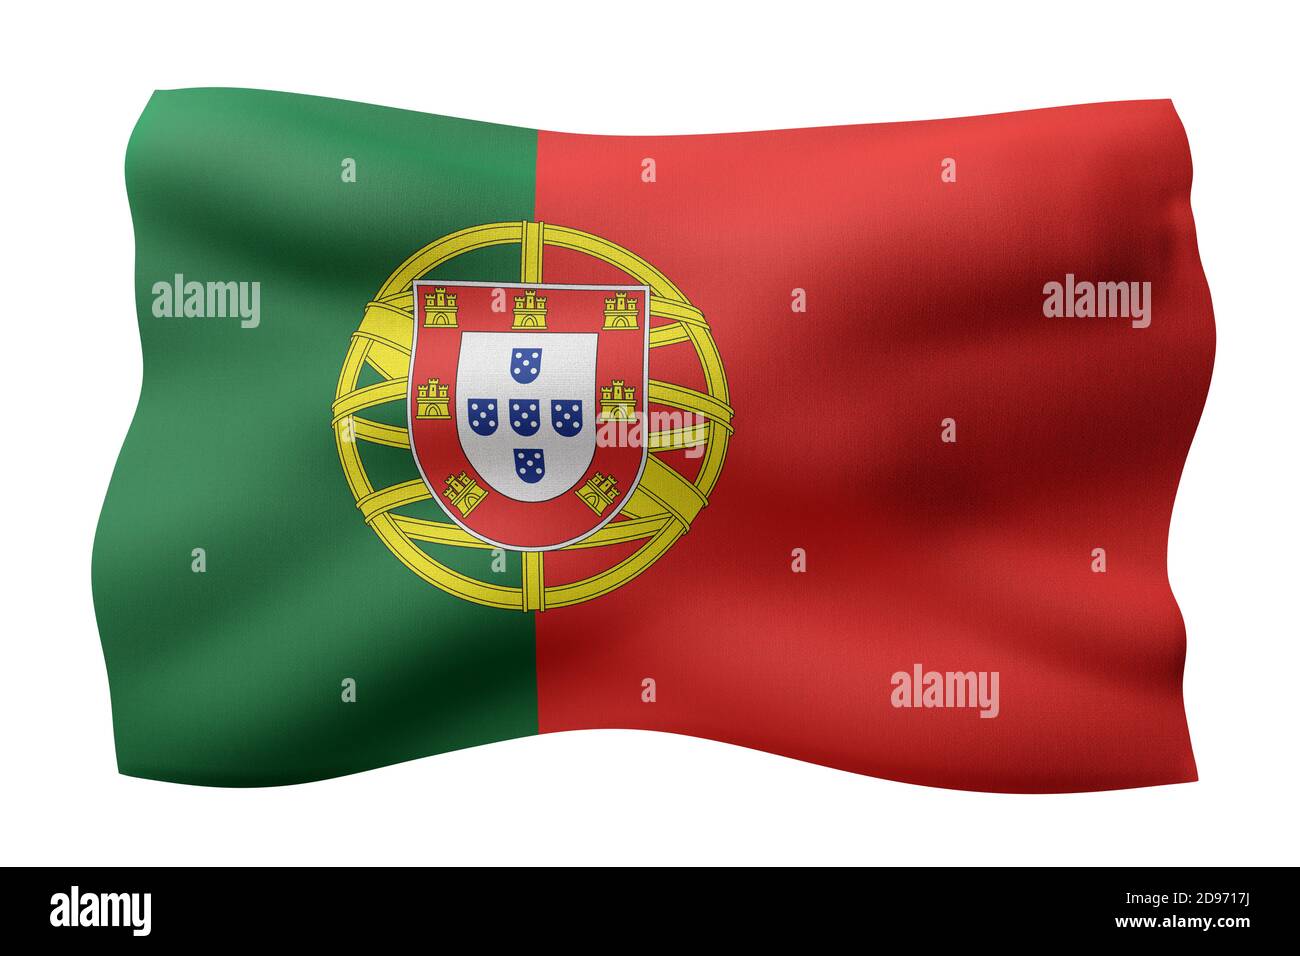 3d rendering of a detail of a silked Portugal flag on a white background Stock Photo